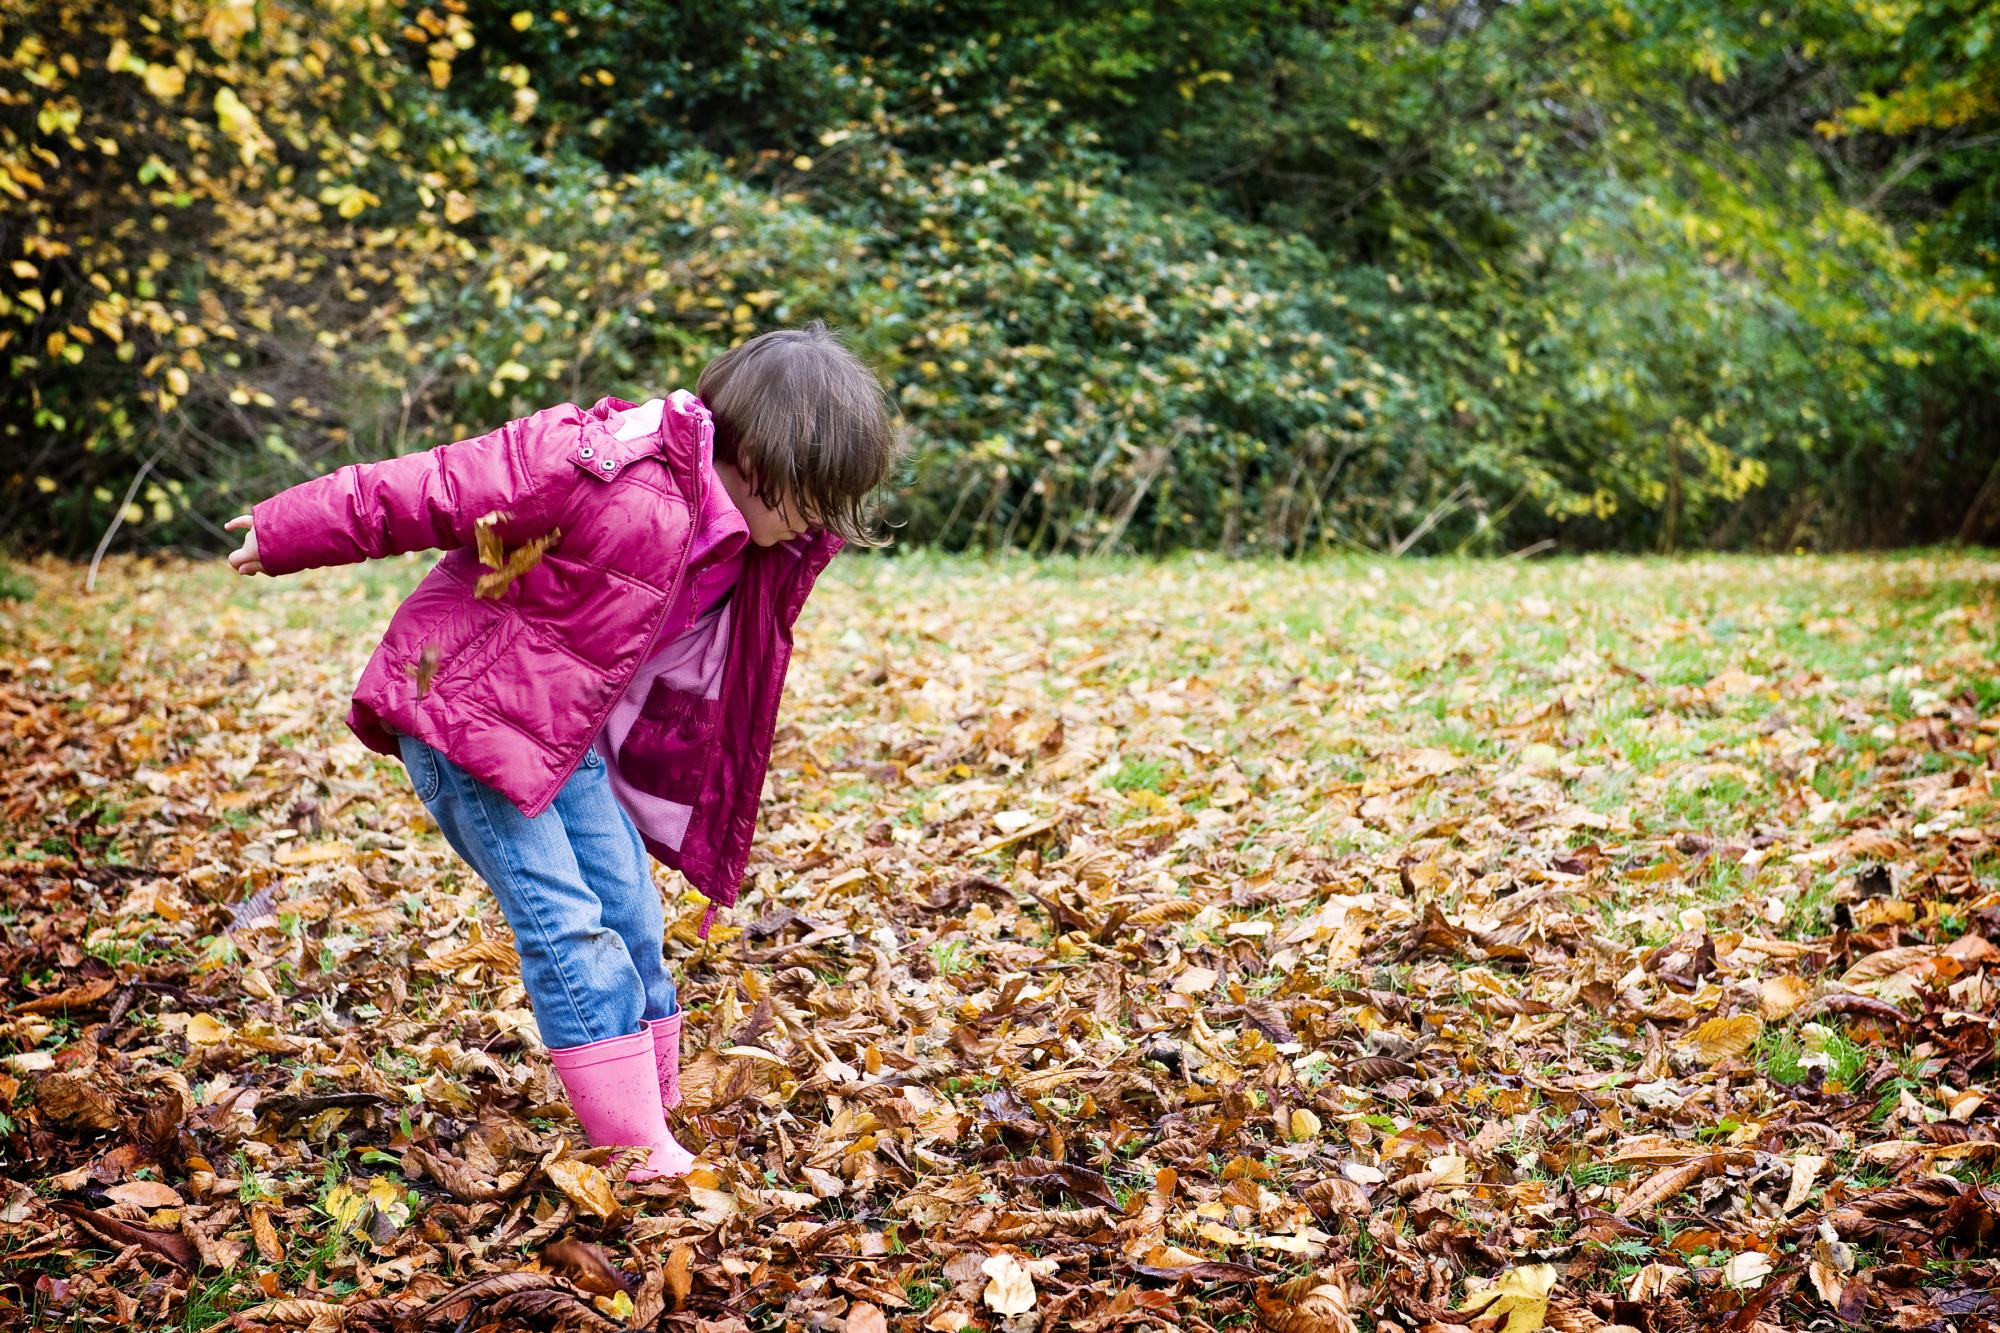 Young child jumping into pile of autumn leaves. ©beckyduncanphotographyltd/SNH. For information on reproduction rights contact the Scottish Natural Heritage Image Library on Tel. 01738 444177 or www.nature.scot